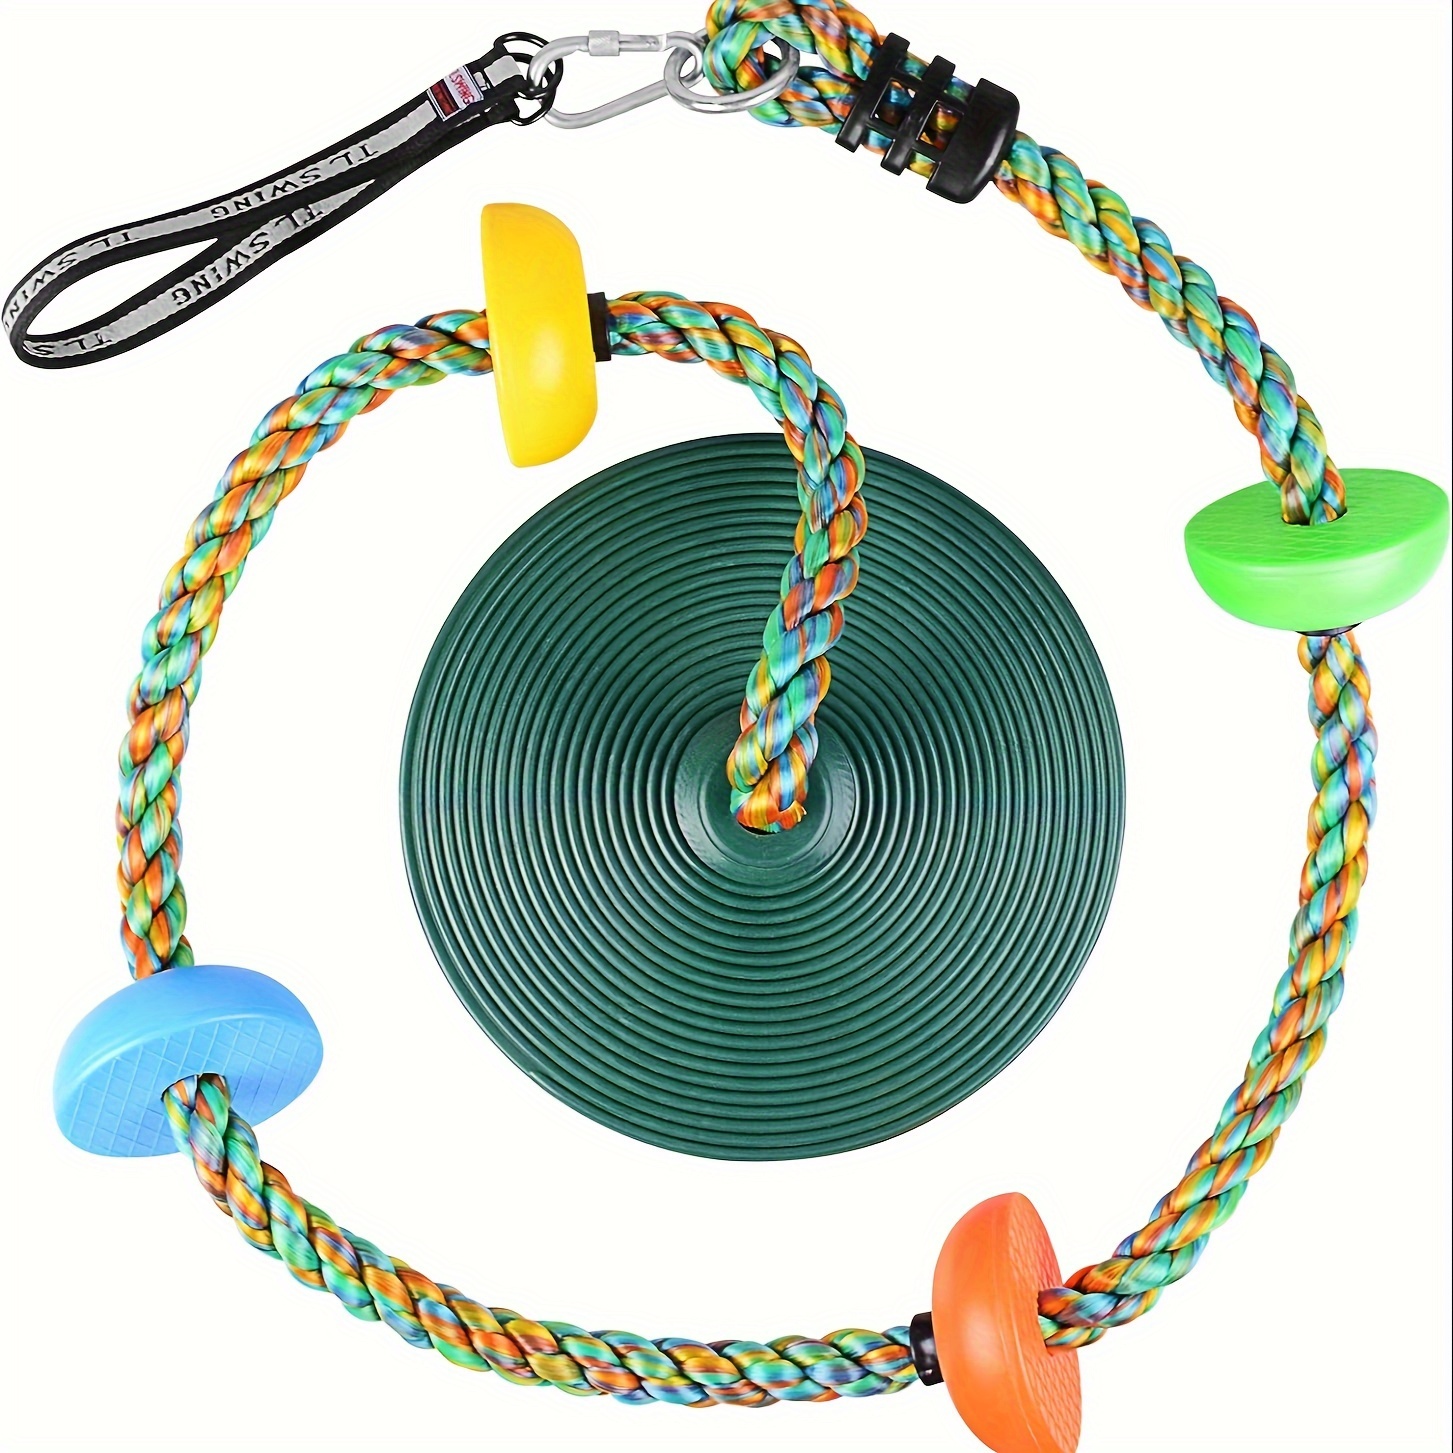 Climbing Rope Tree Swing with Disc Swings Seat Rope Ladder for Kids-  Playground Swingset Accessories Outdoor for Kids - Trees House Tire Saucer  Swing